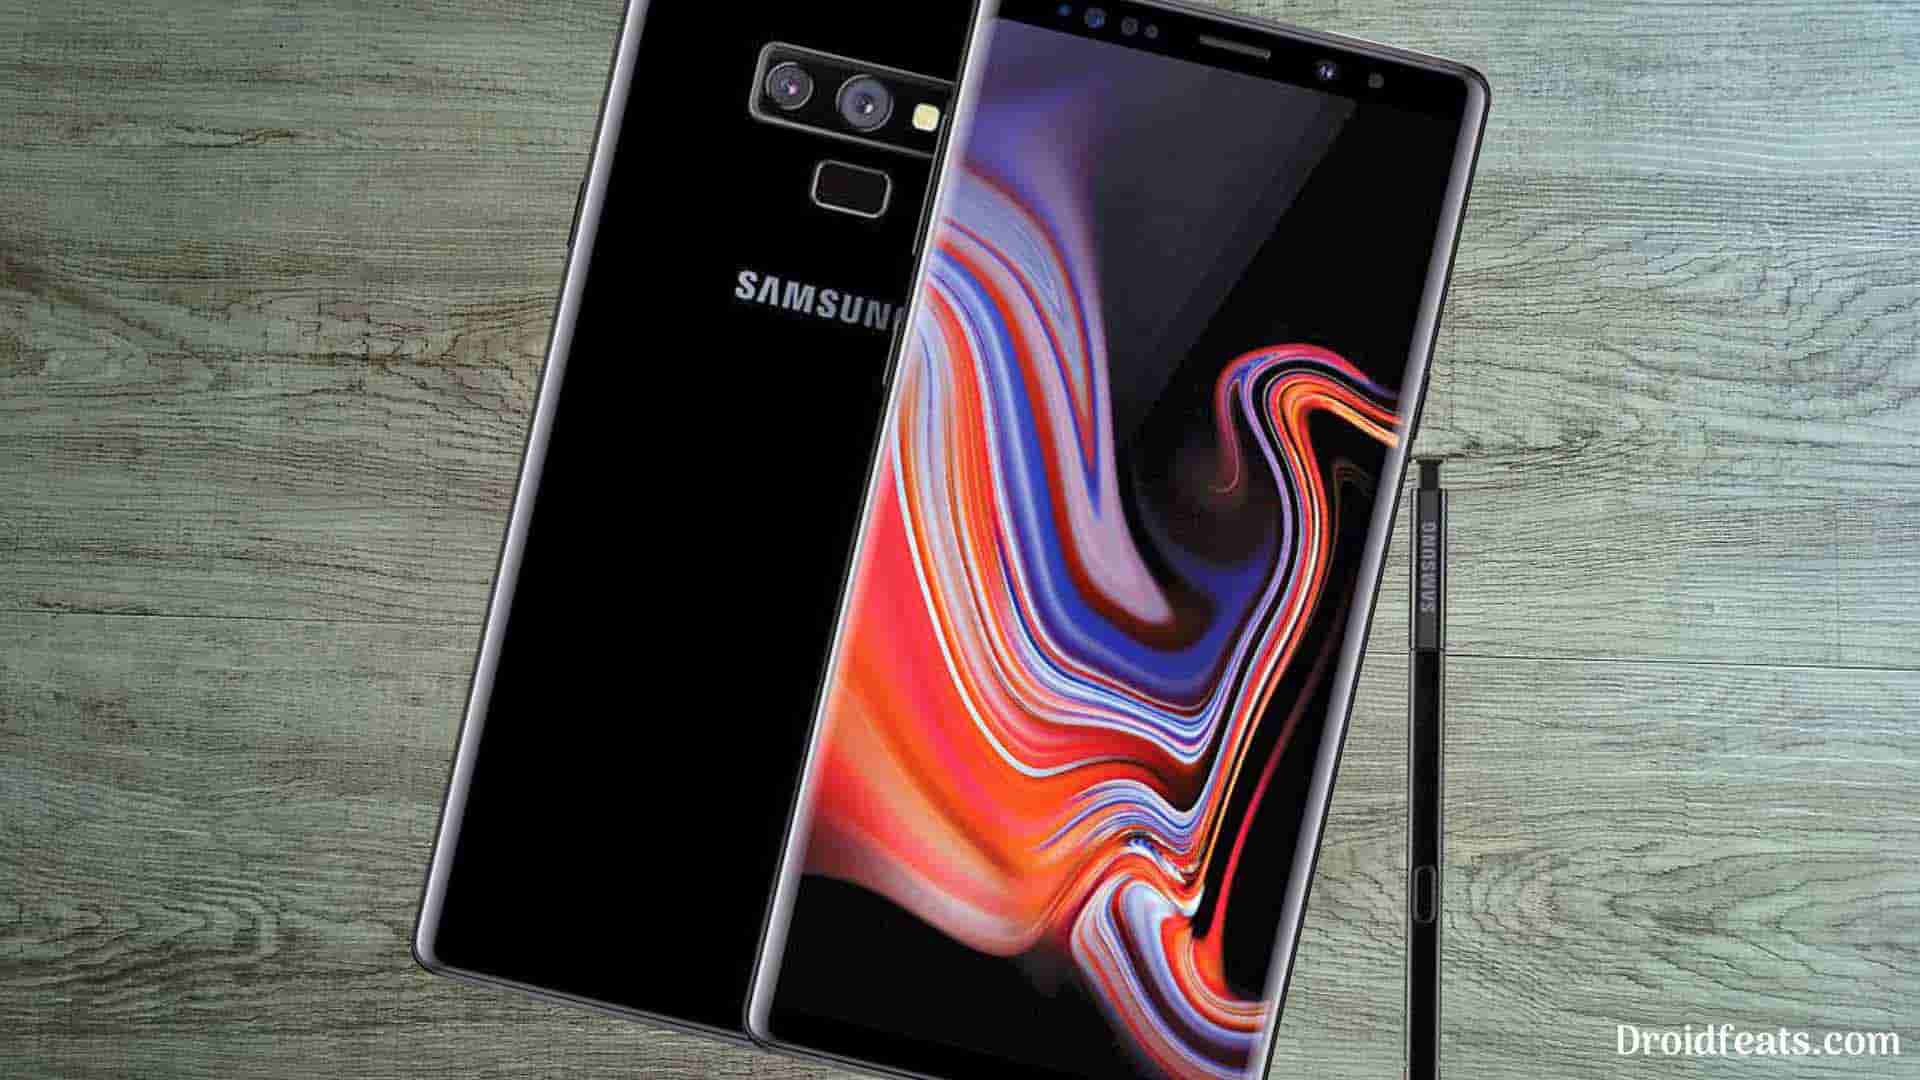 Galaxy Note 9 wallpapers, sounds, apps